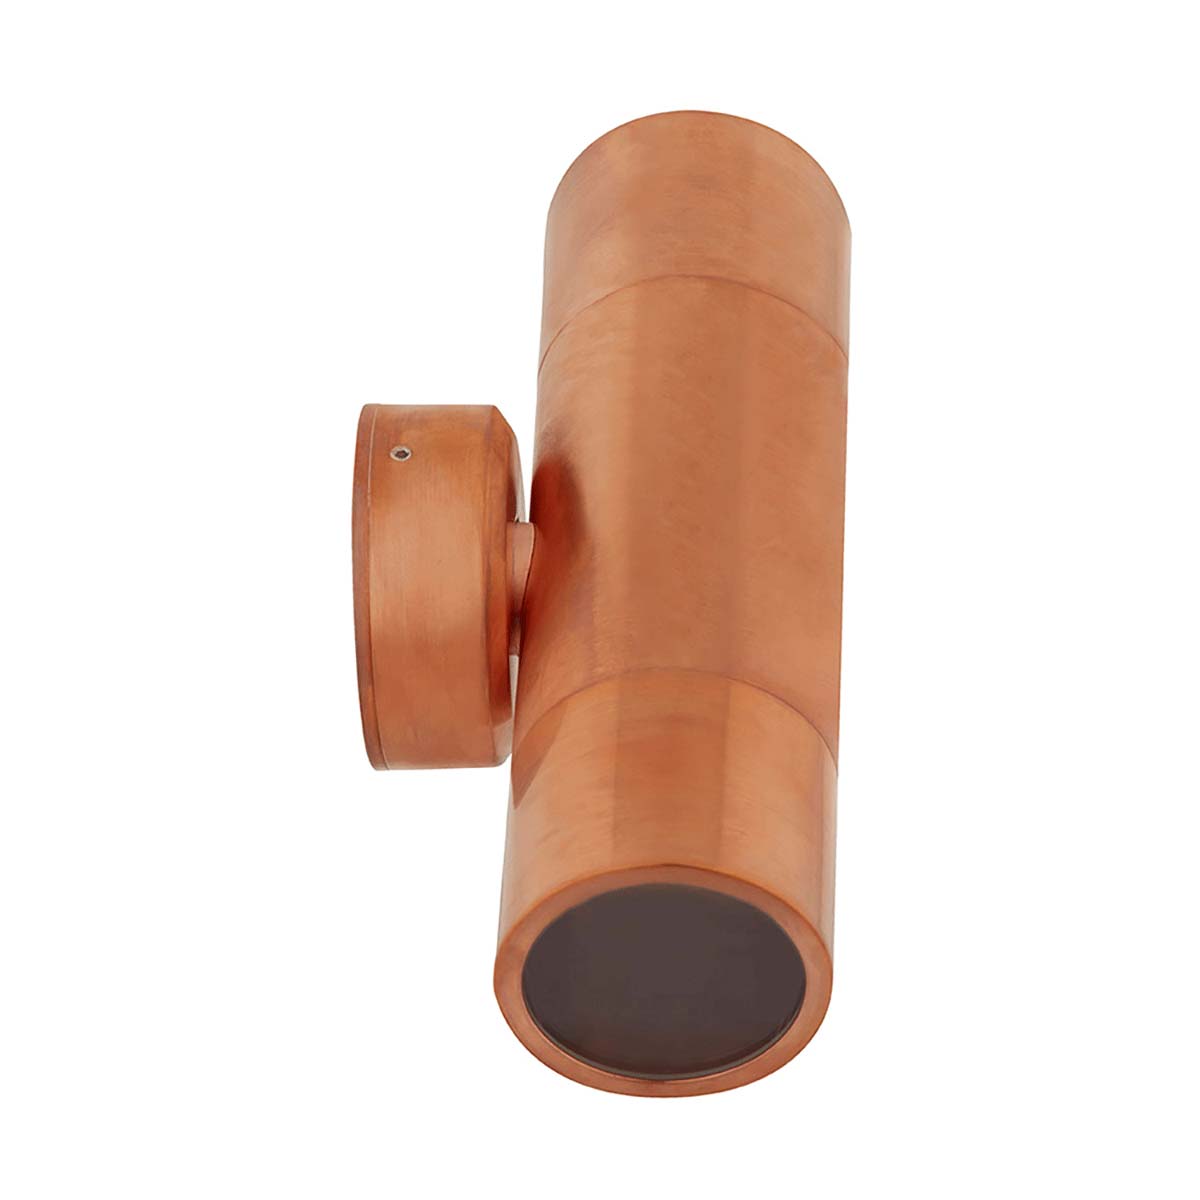 Up/Down Wall Light MR16 Copper